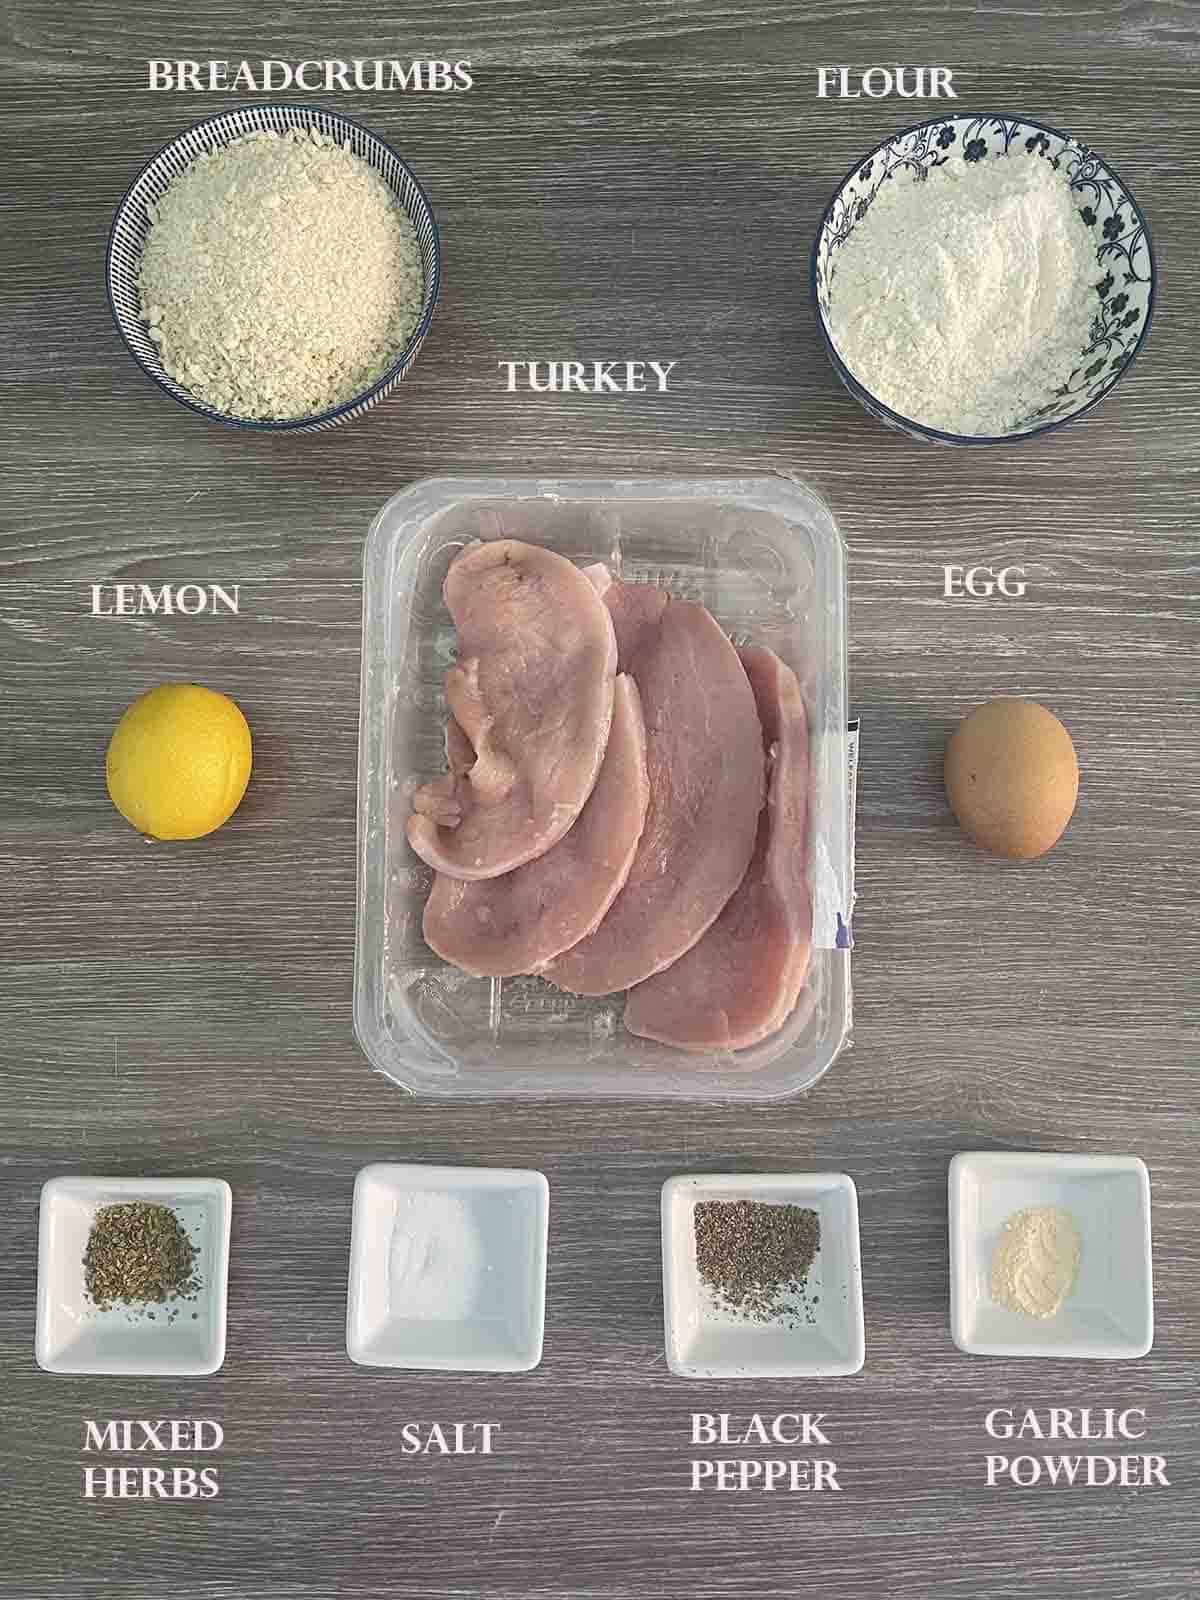 ingredients including turkey, egg, flour and breadcrumbs.